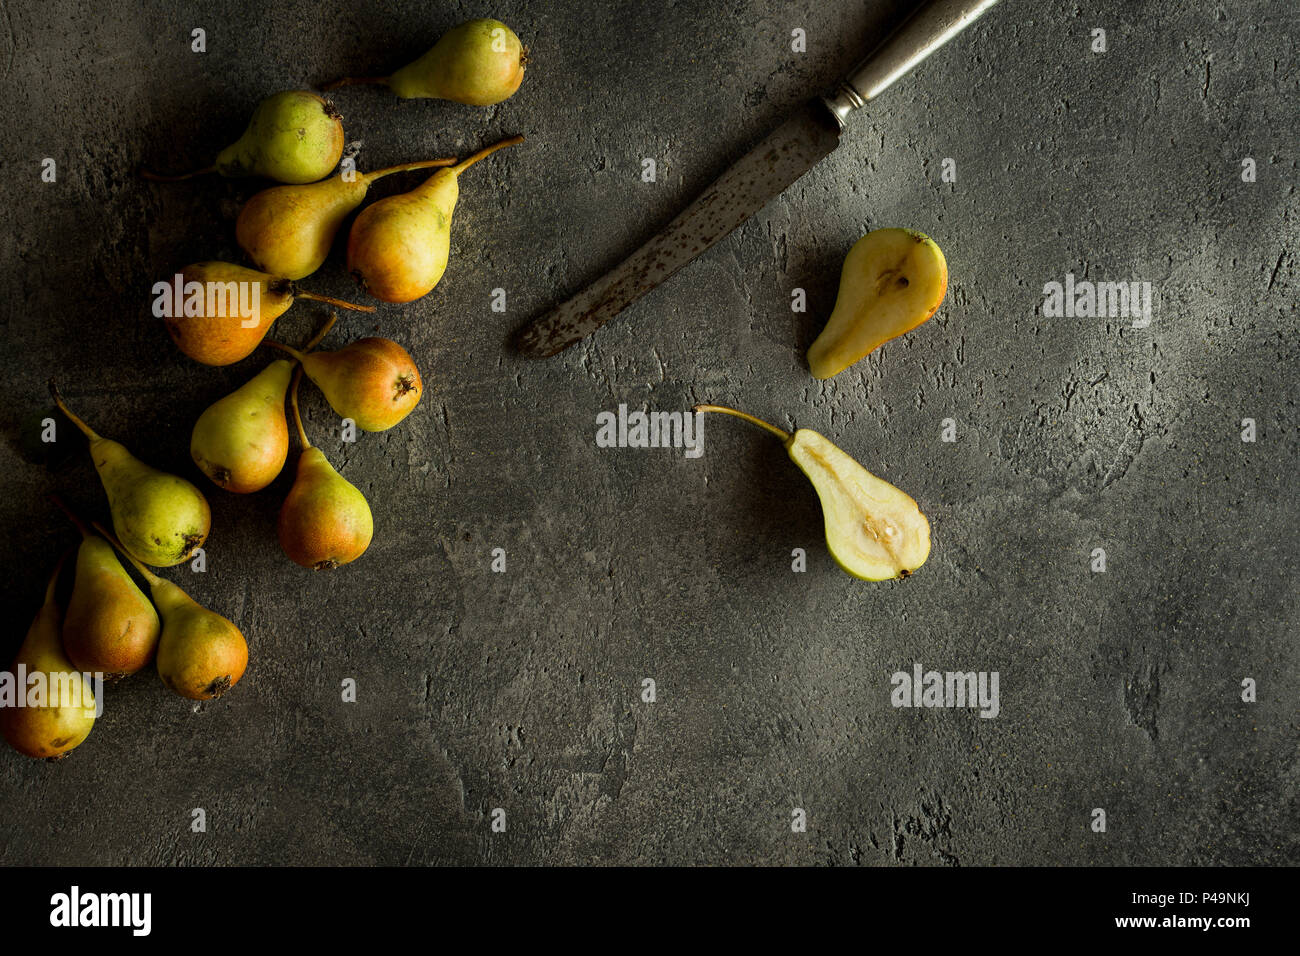 Organic Pears on Rustic Dark Background with Copy Space Stock Photo